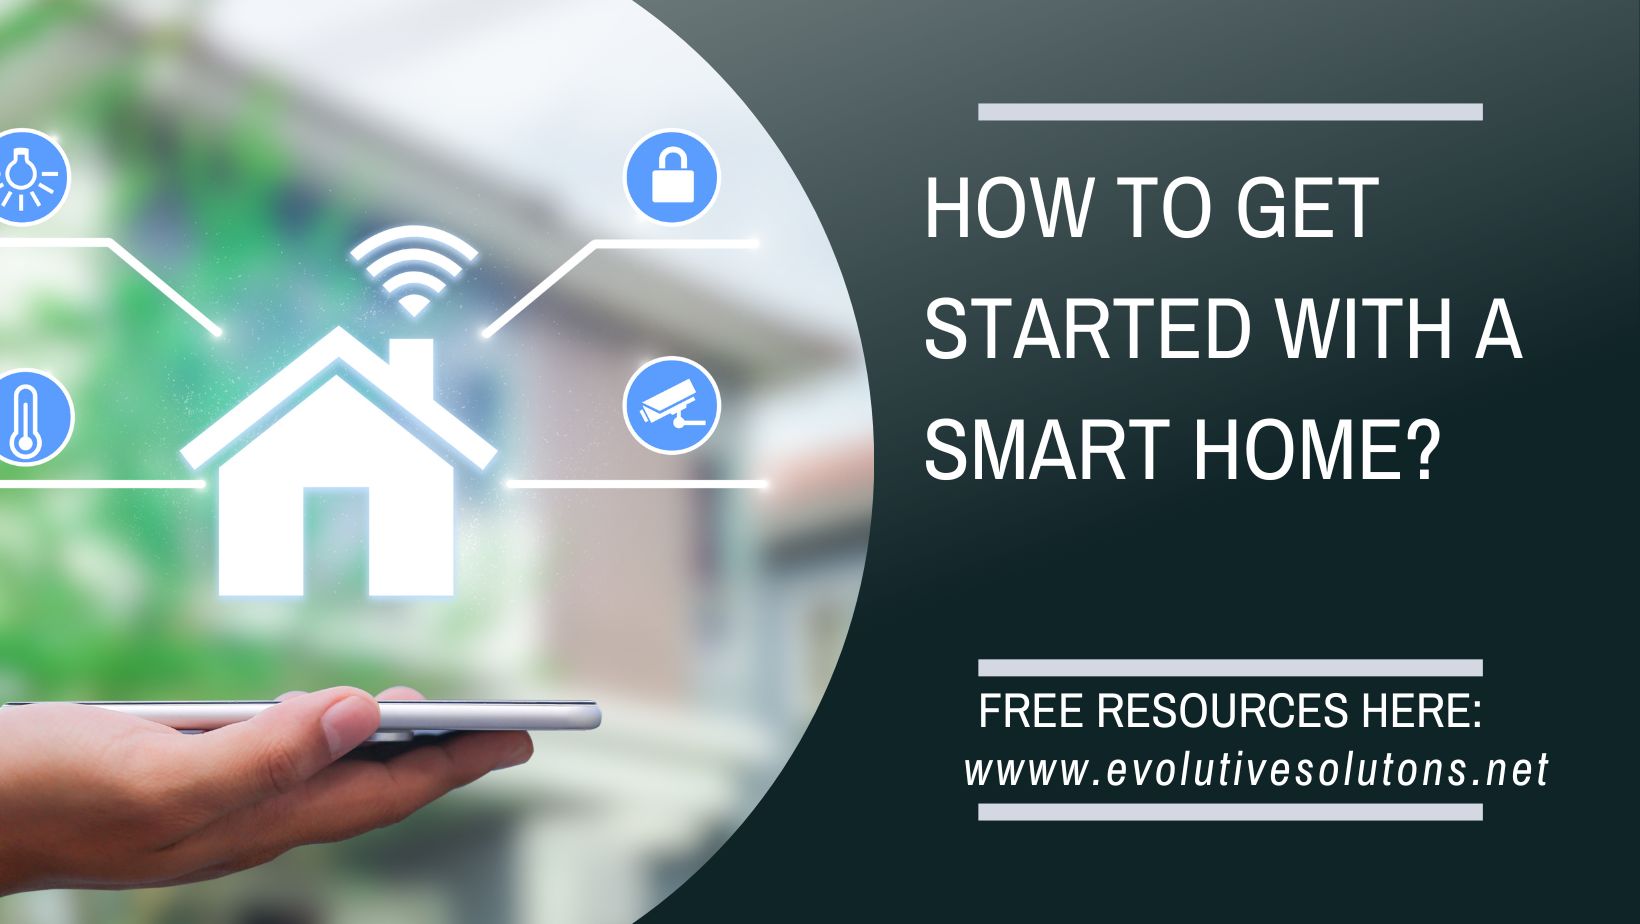 How to get started with a Smart Home?